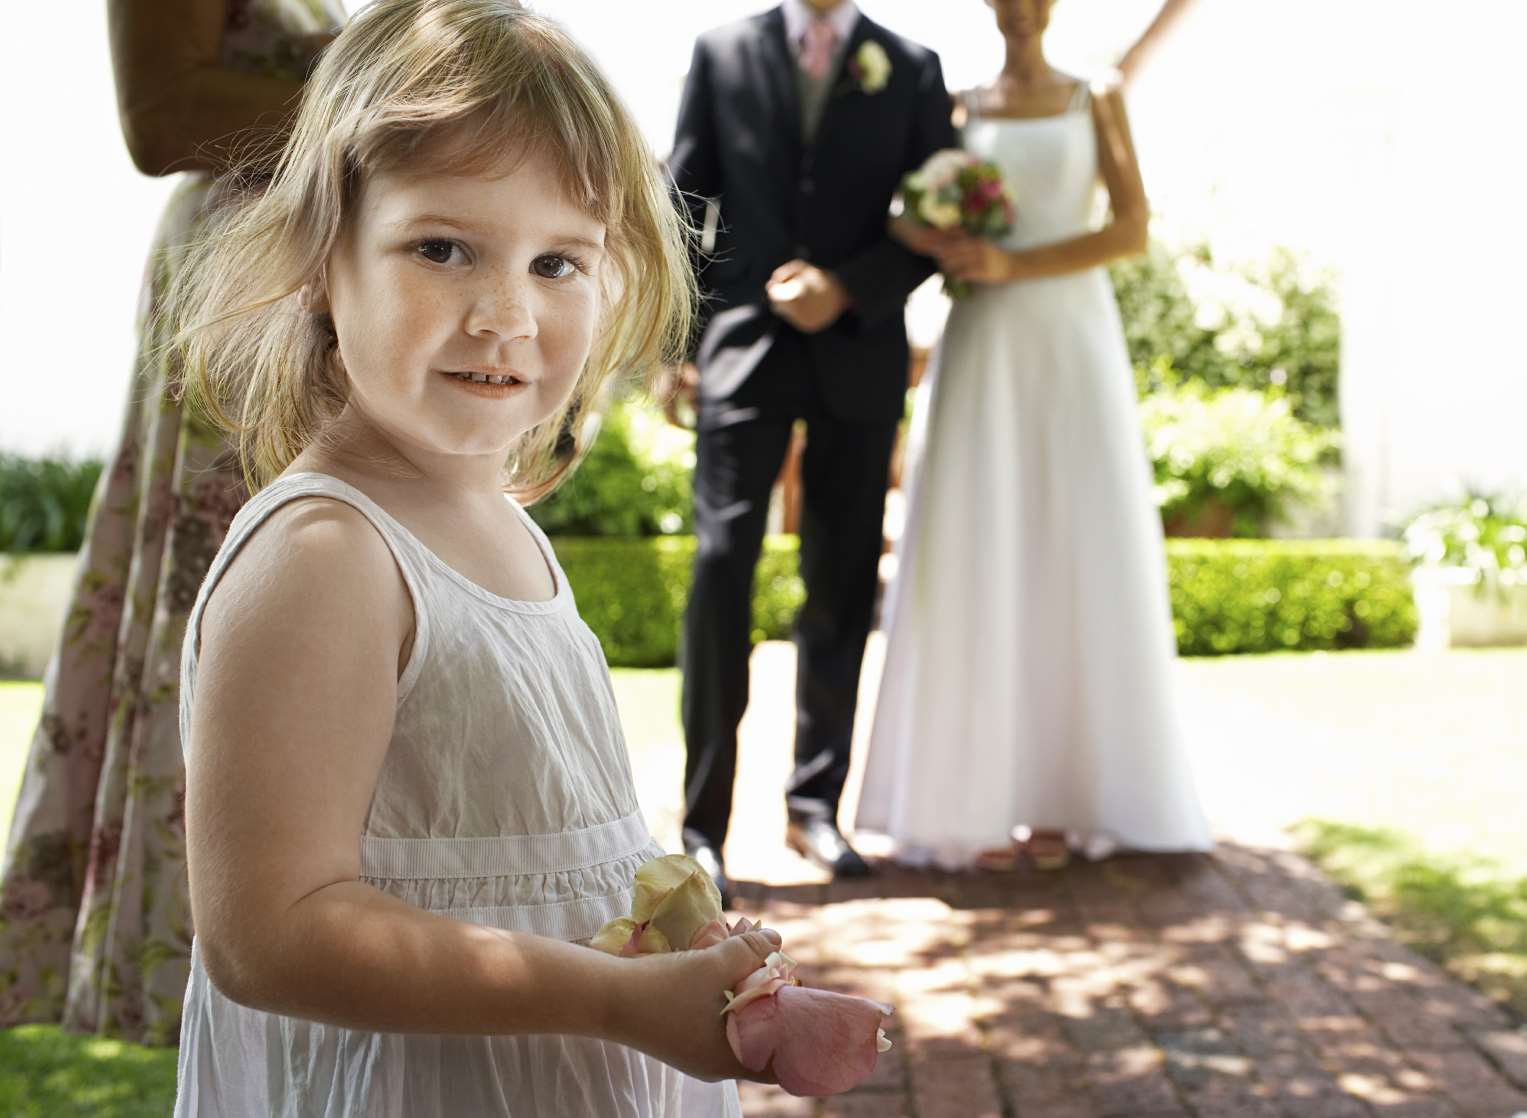 An important first step is to decide what restrictions you are putting on children's ages at your wedding